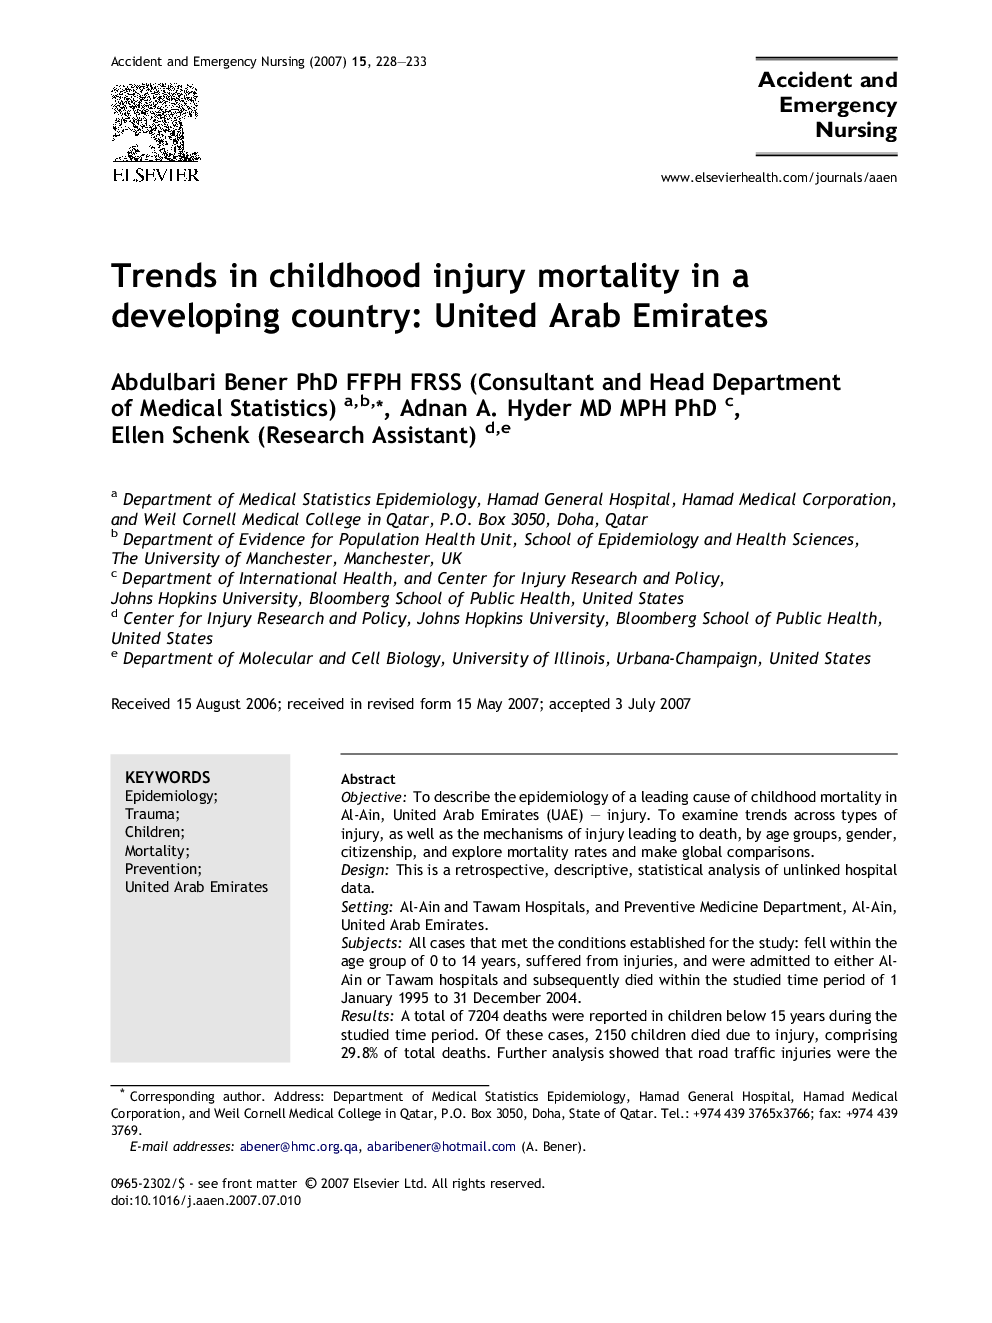 Trends in childhood injury mortality in a developing country: United Arab Emirates